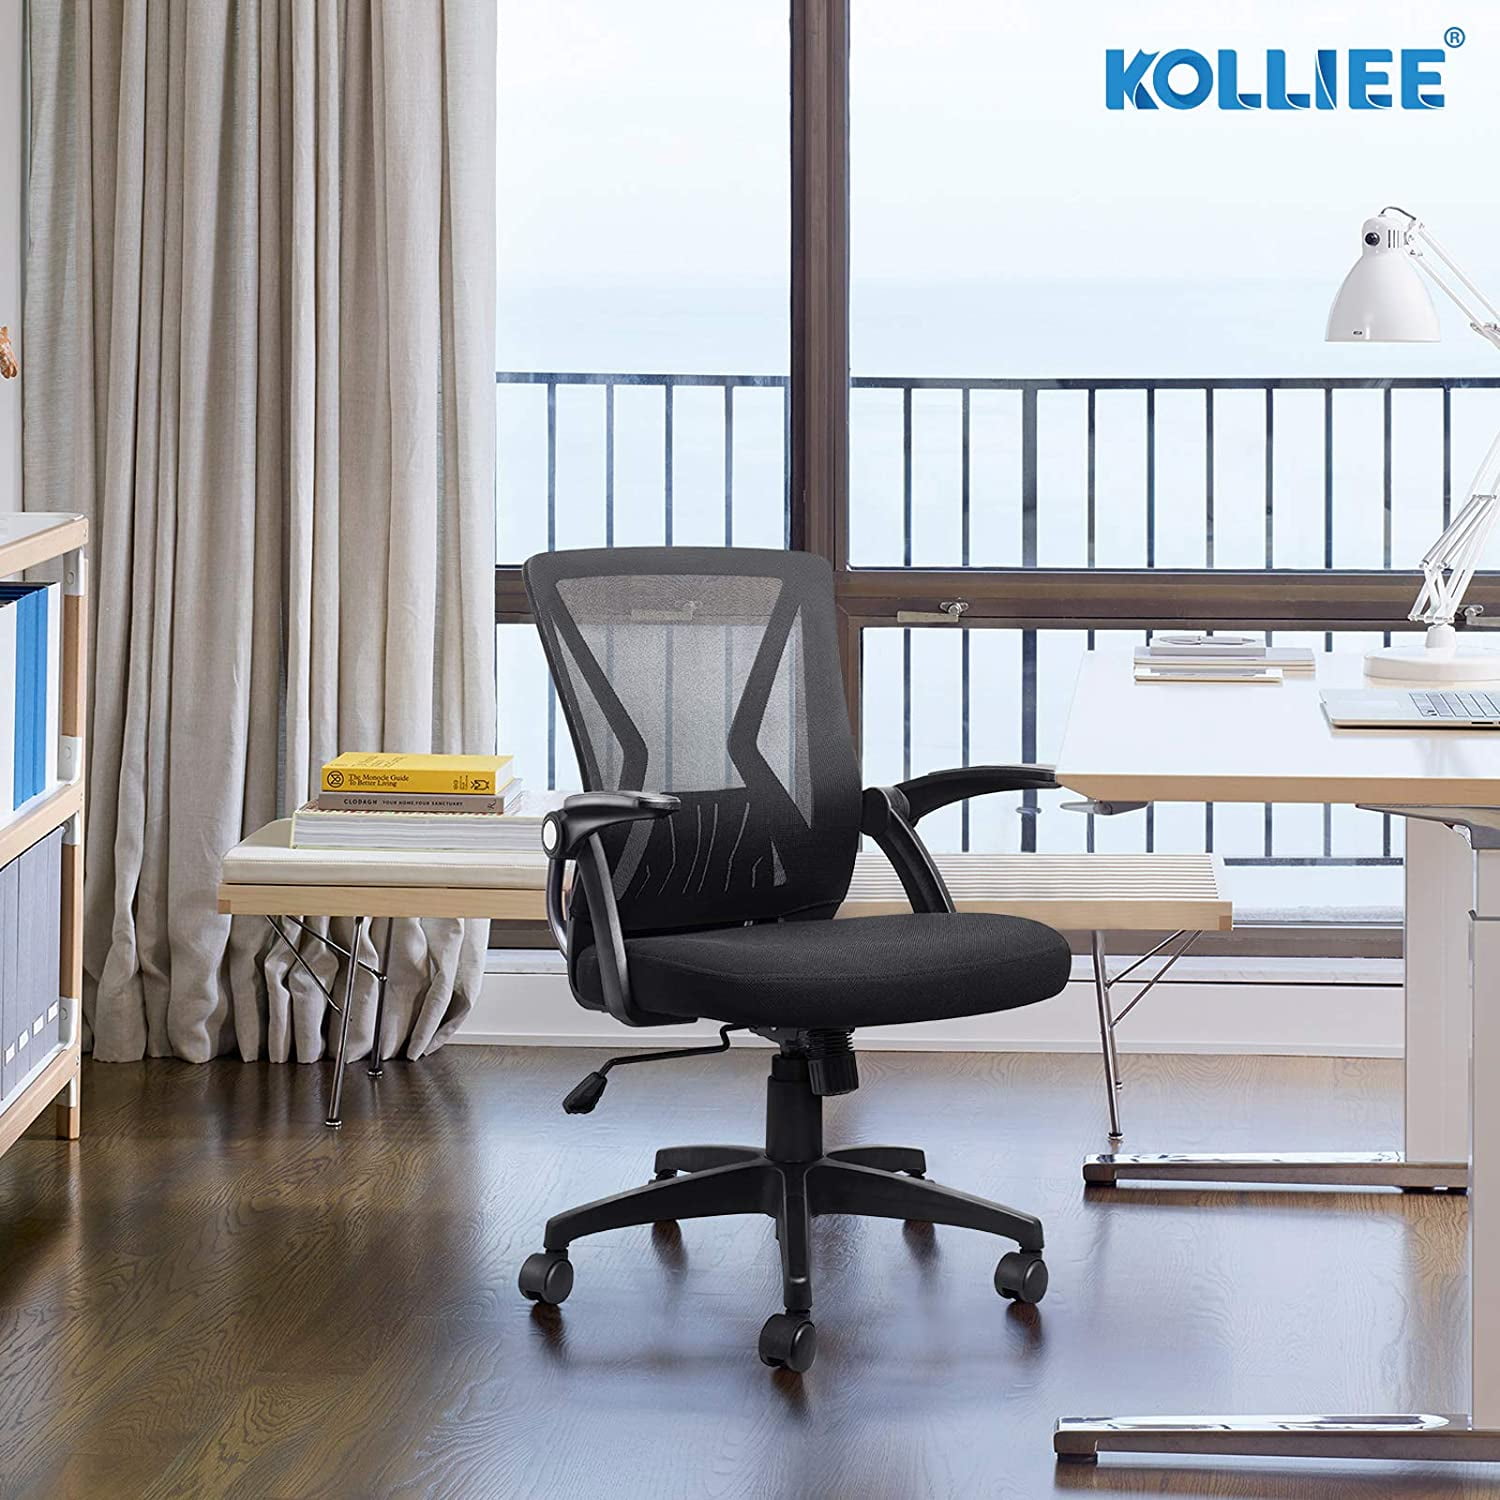 KOLLIEE Mid Back Mesh Office Chair Ergonomic Swivel Black Mesh Computer  Chair Flip Up Arms with Lumbar Support Adjustable Height Task Chair